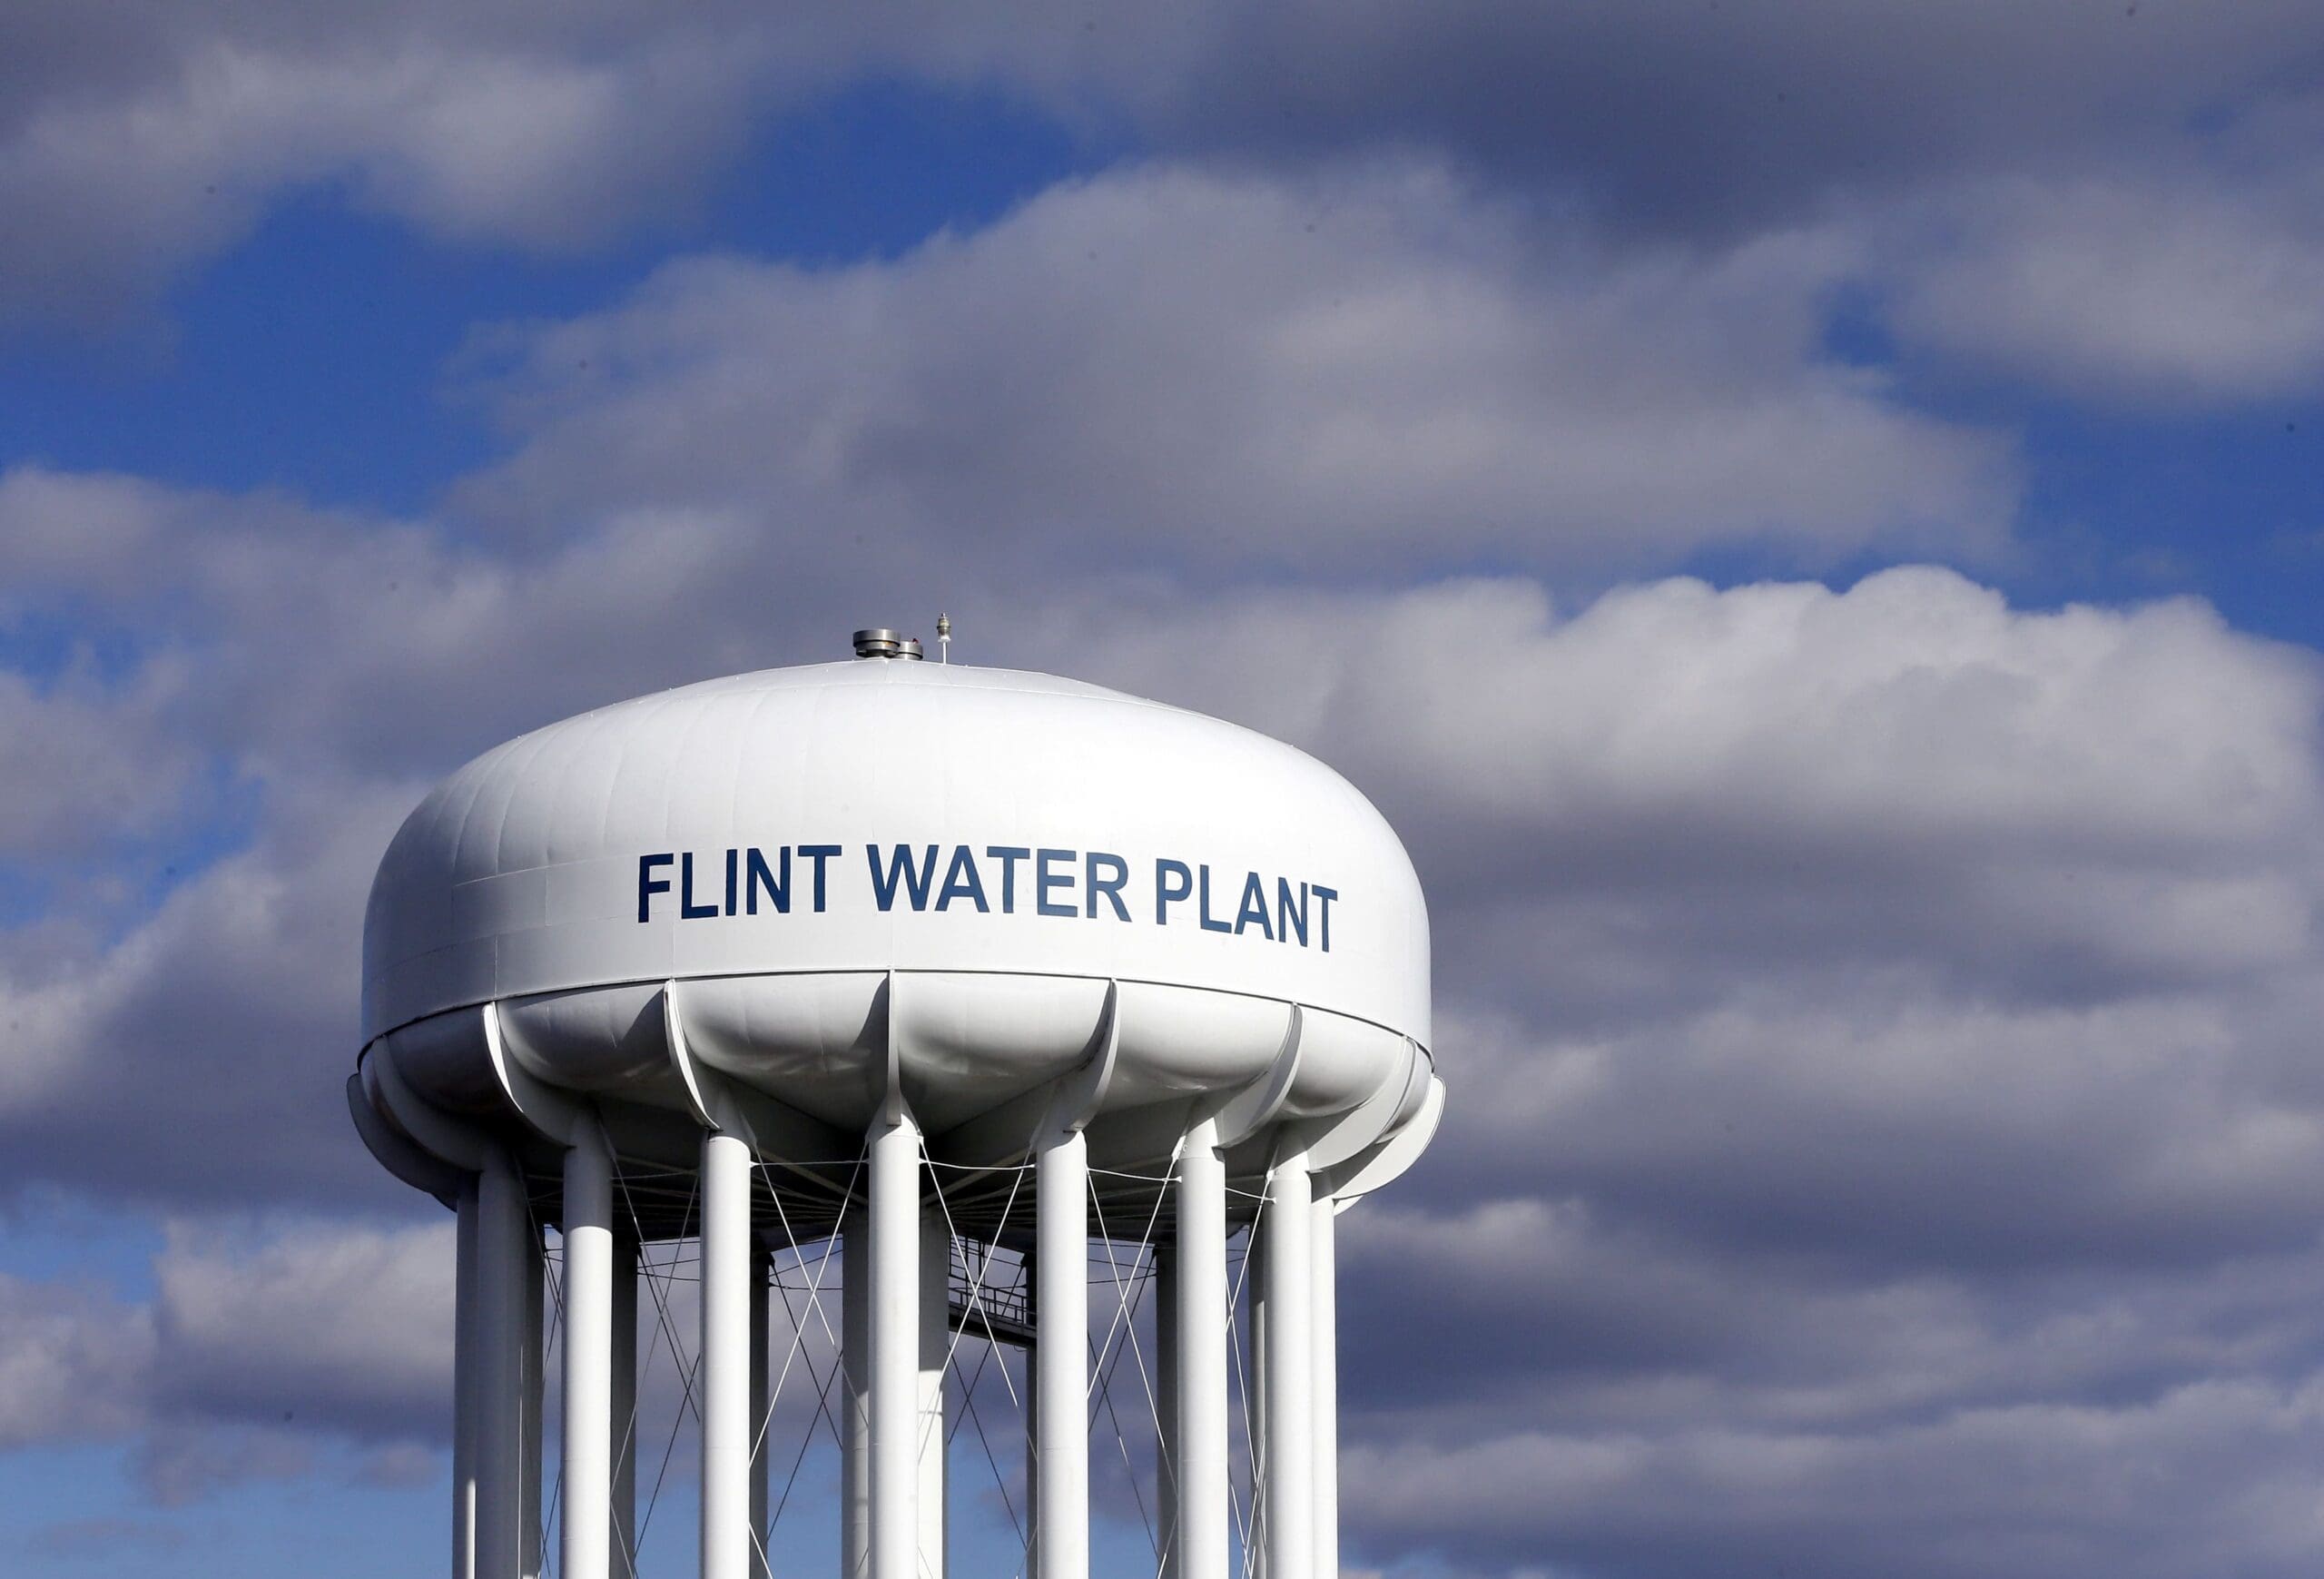 In this March 21, 2016, file photo, the Flint Water Plant water tower is seen in Flint, Mich.